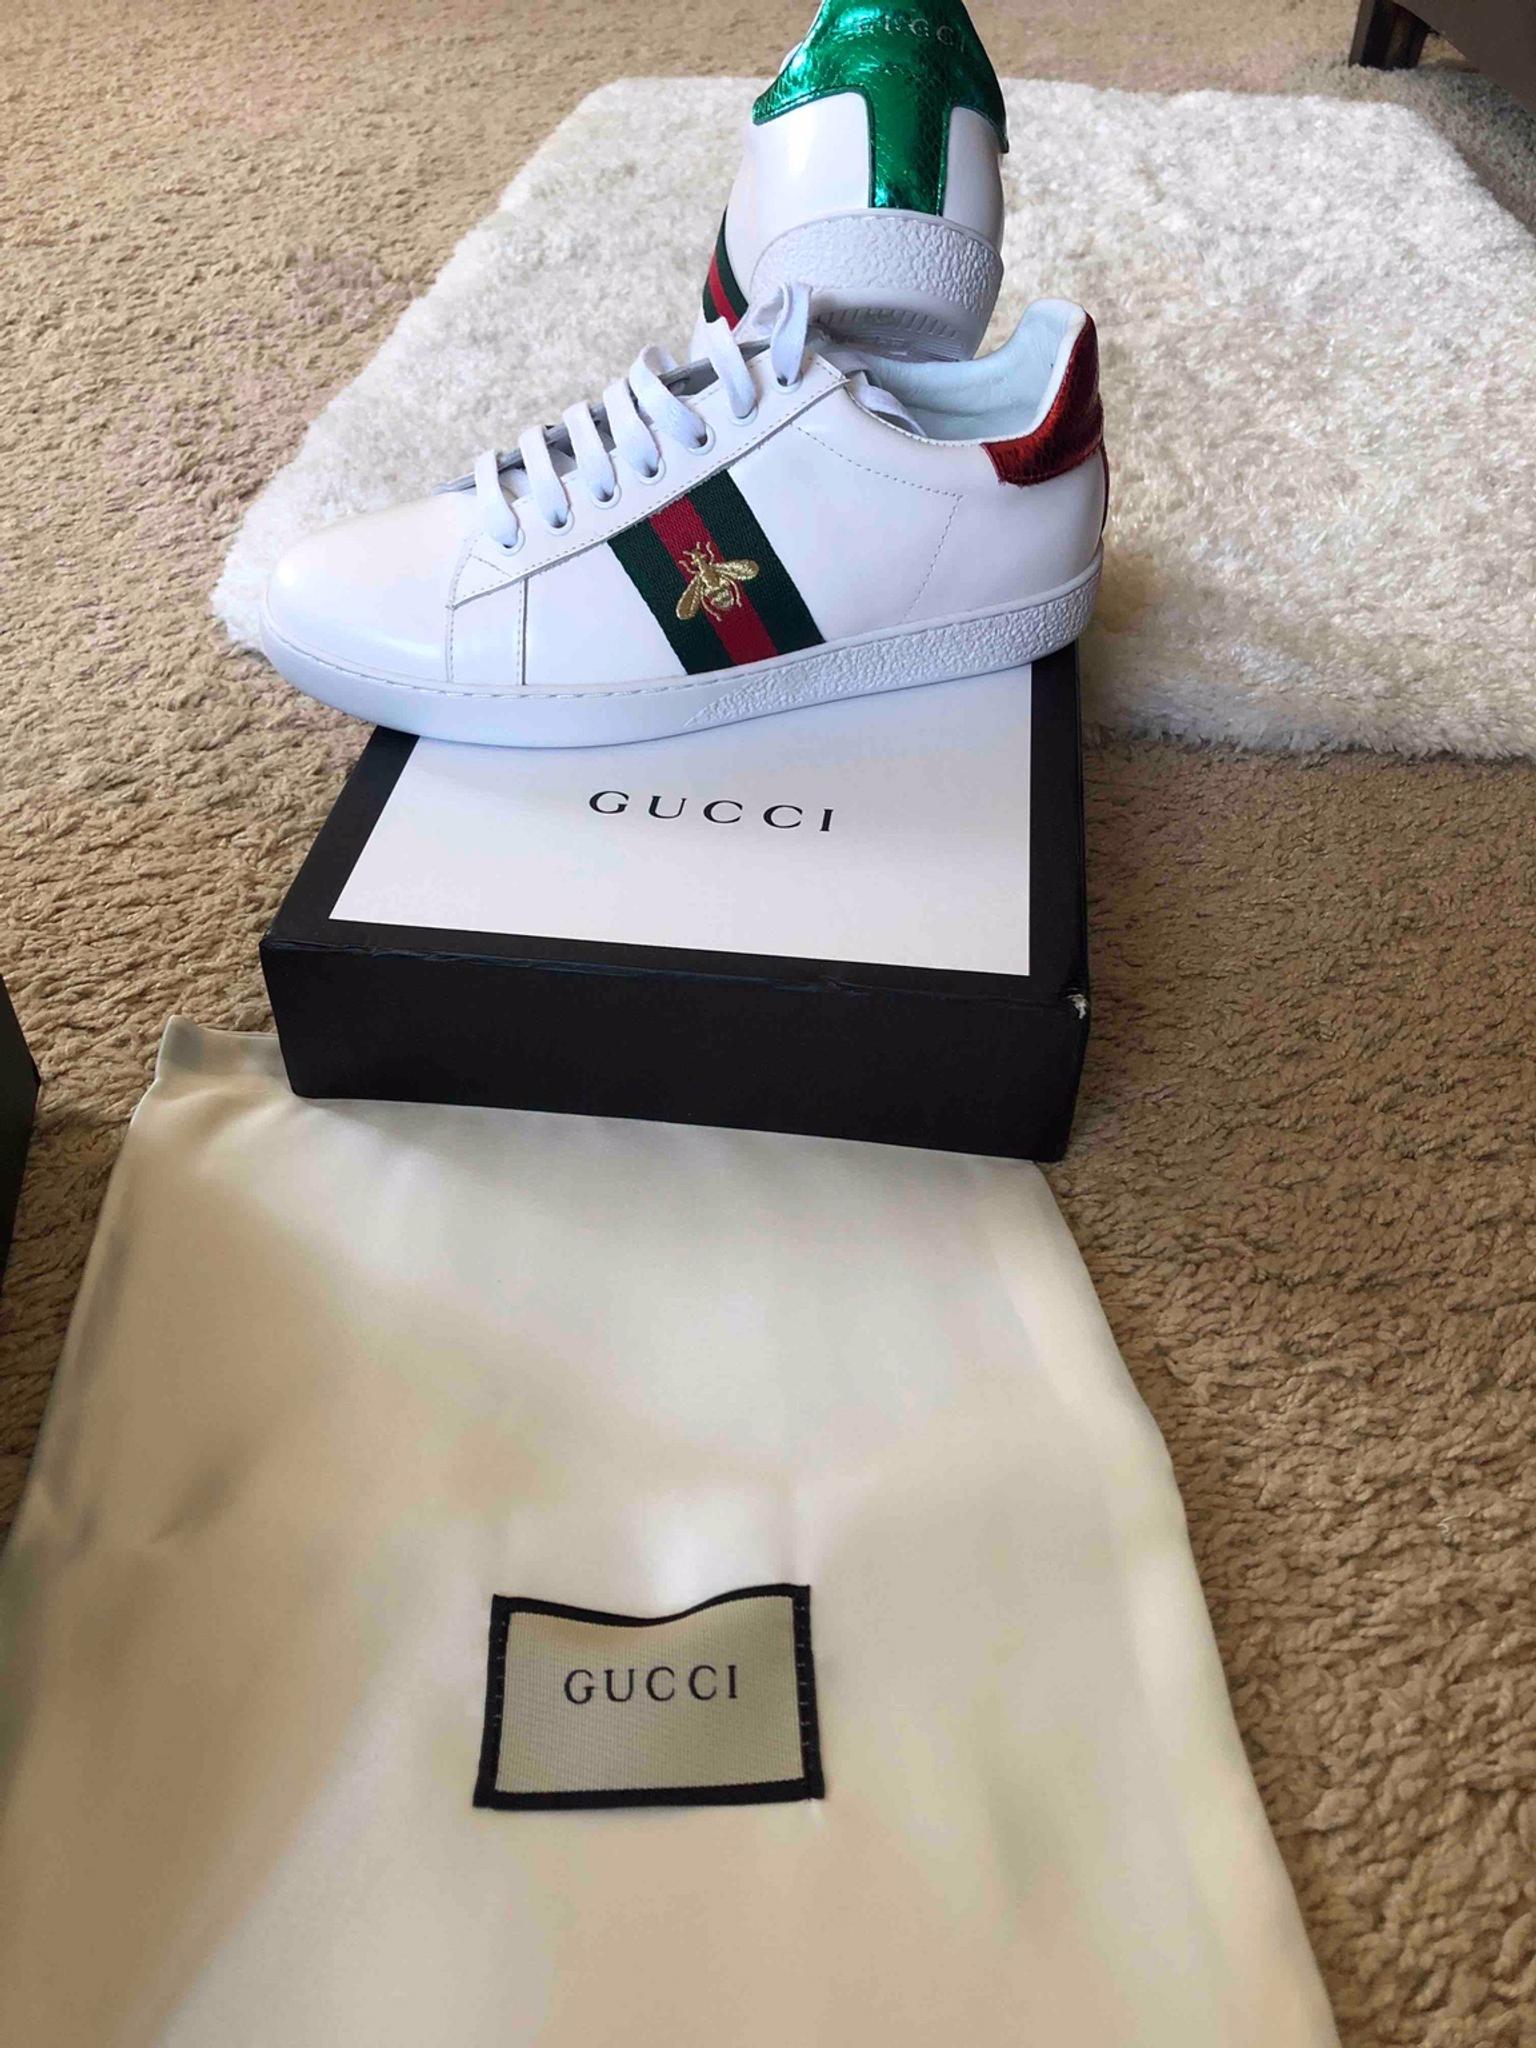 gucci shoes uk price